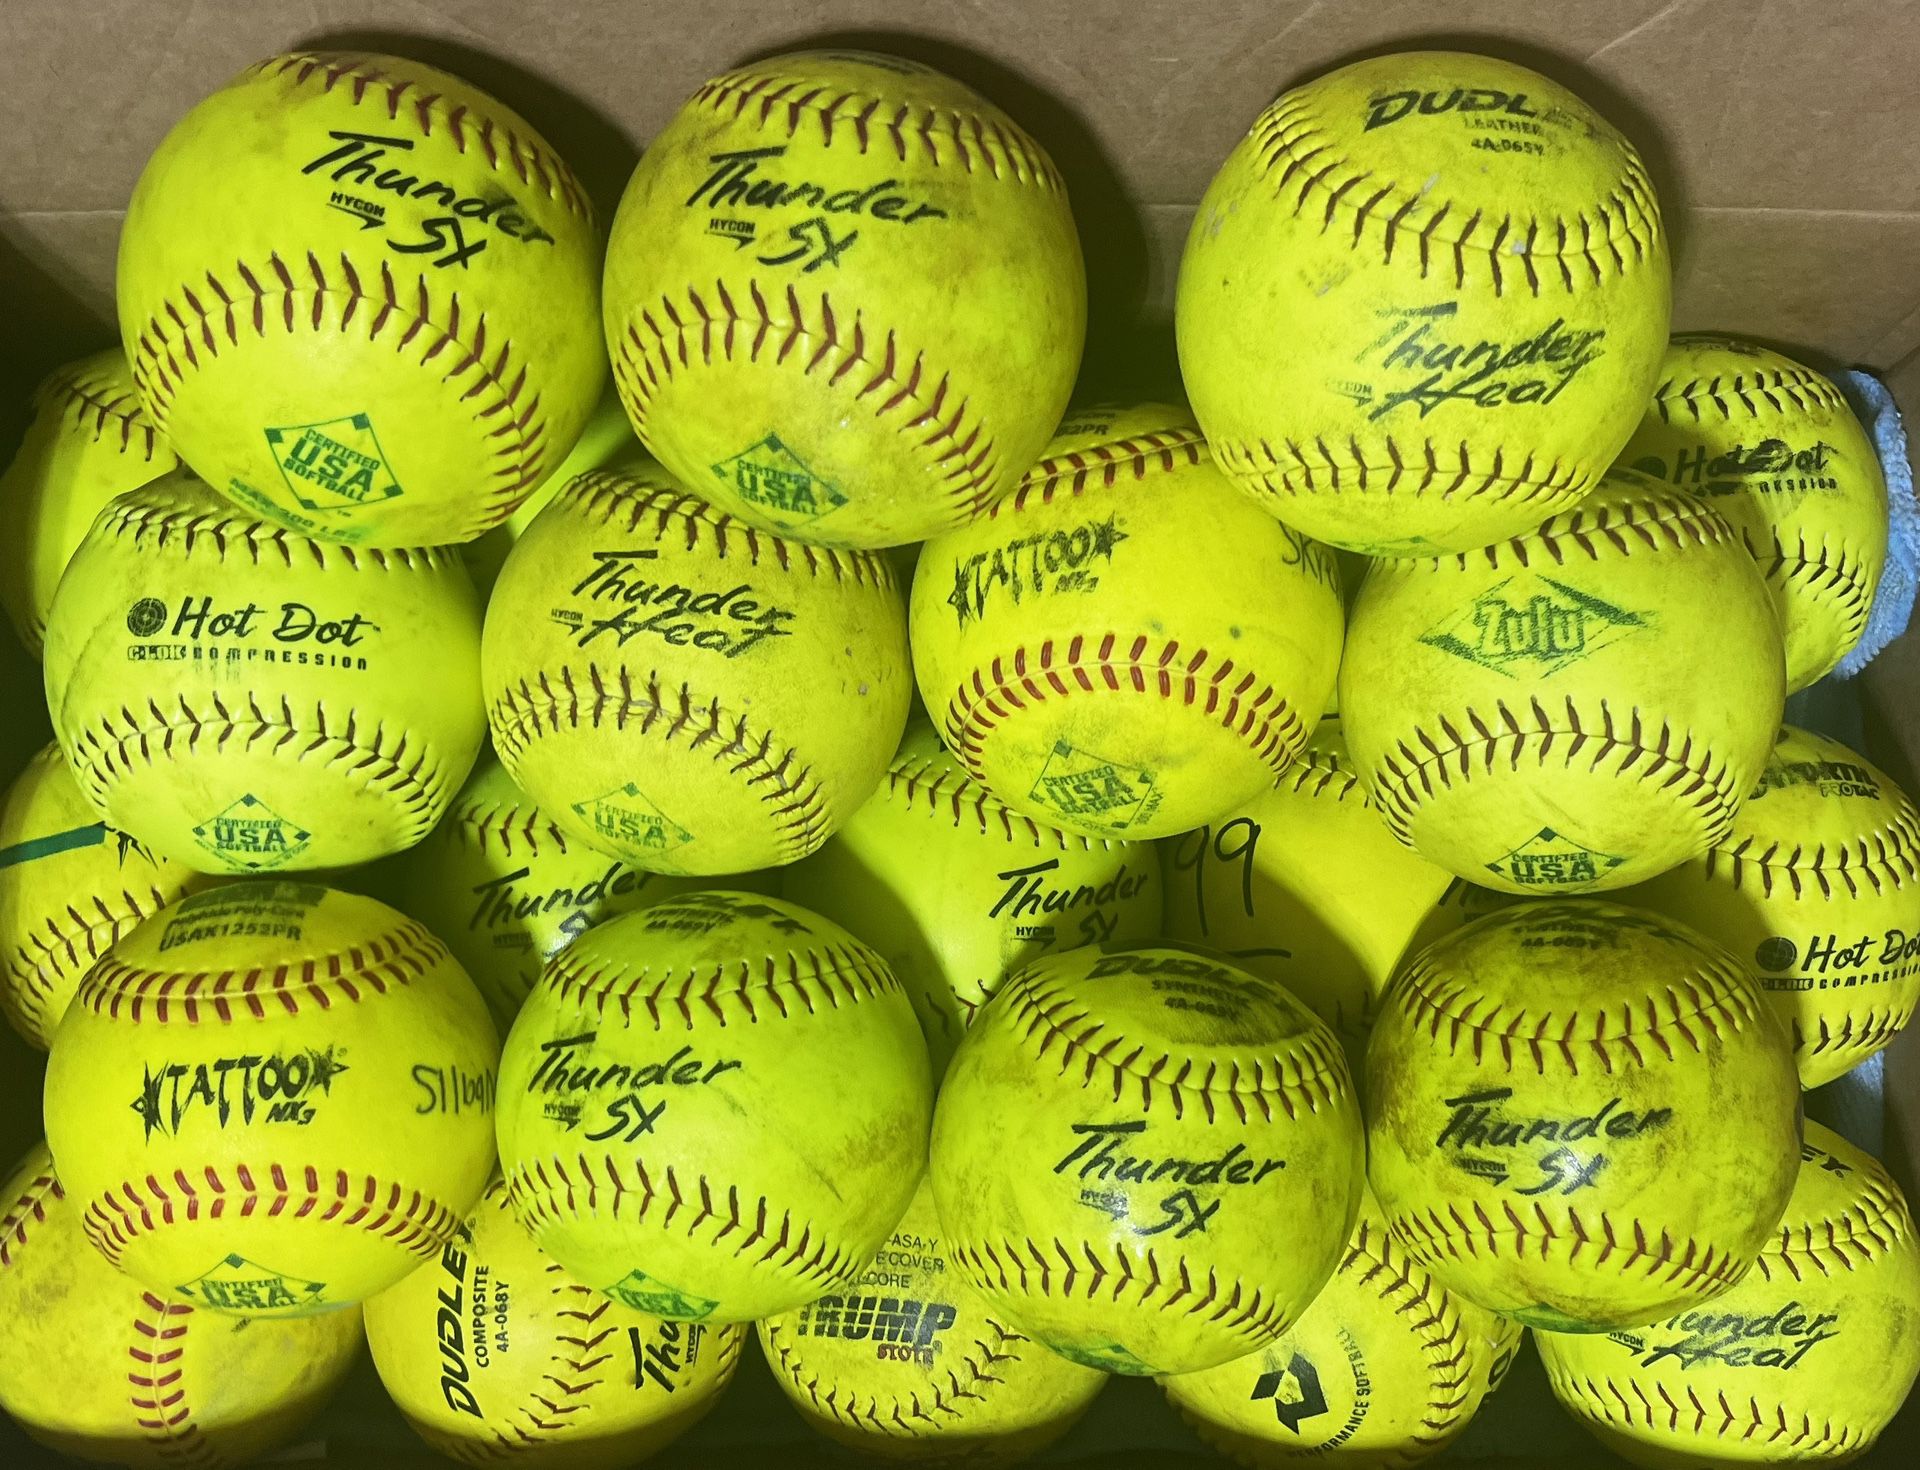 26 High Quality, Slow Pitch Balls: Thunder Sx, Hot Dot, Tattoo, Others 